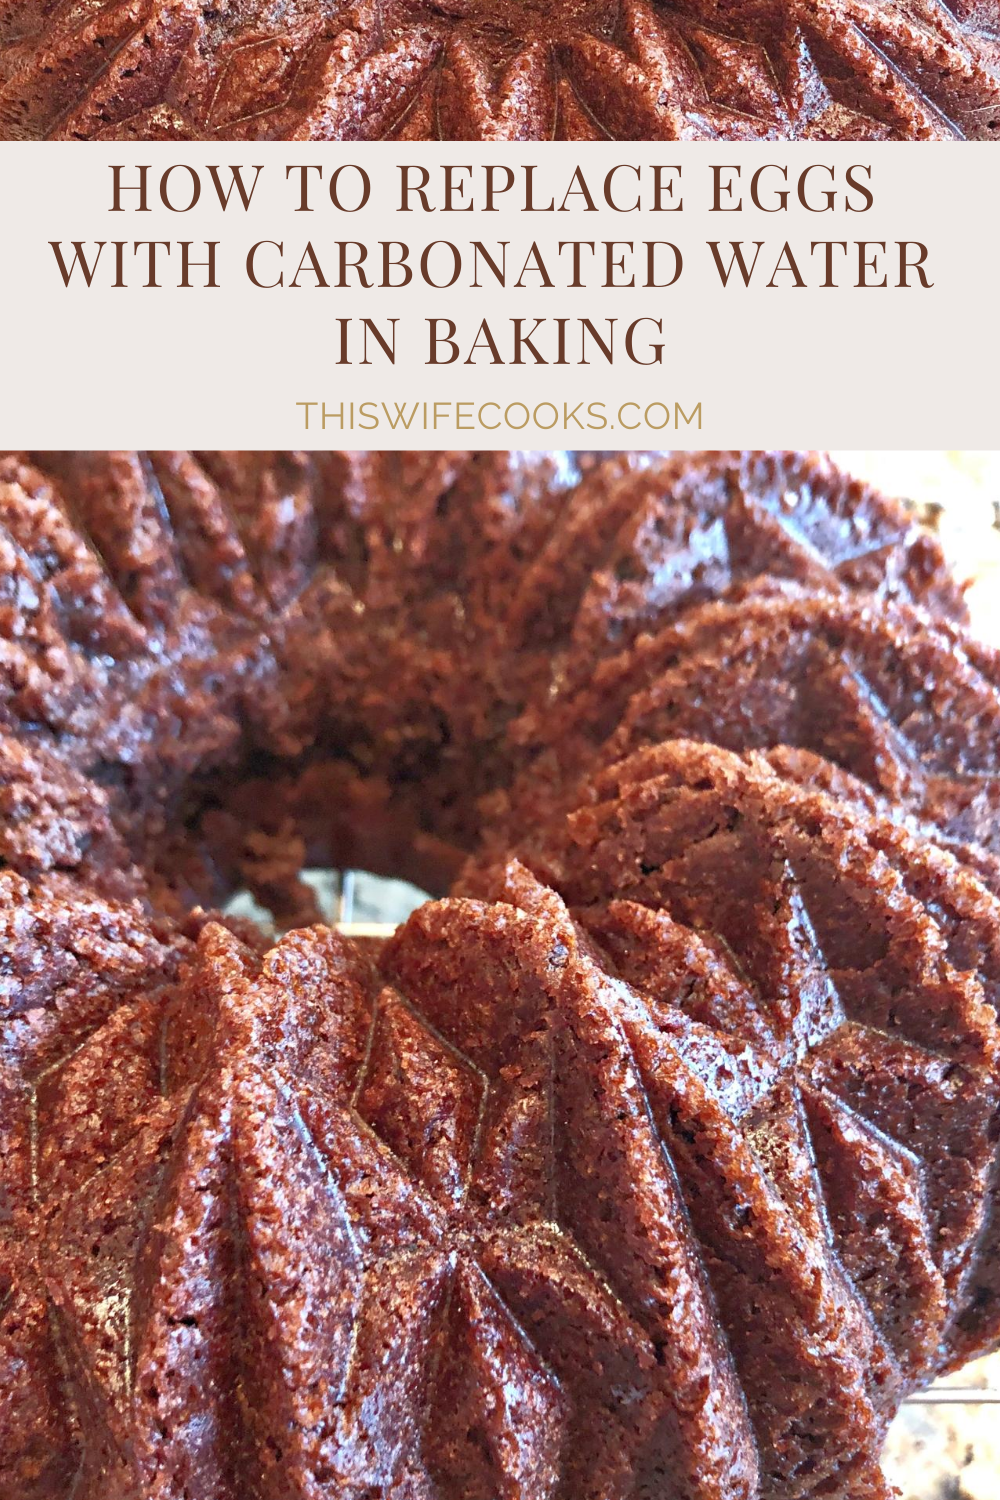 How to Replace Eggs with Carbonated Water in Baking - Got a baking recipe that calls for eggs? No problem! Replace the eggs with carbonated water using this super easy vegan baking hack! via @thiswifecooks